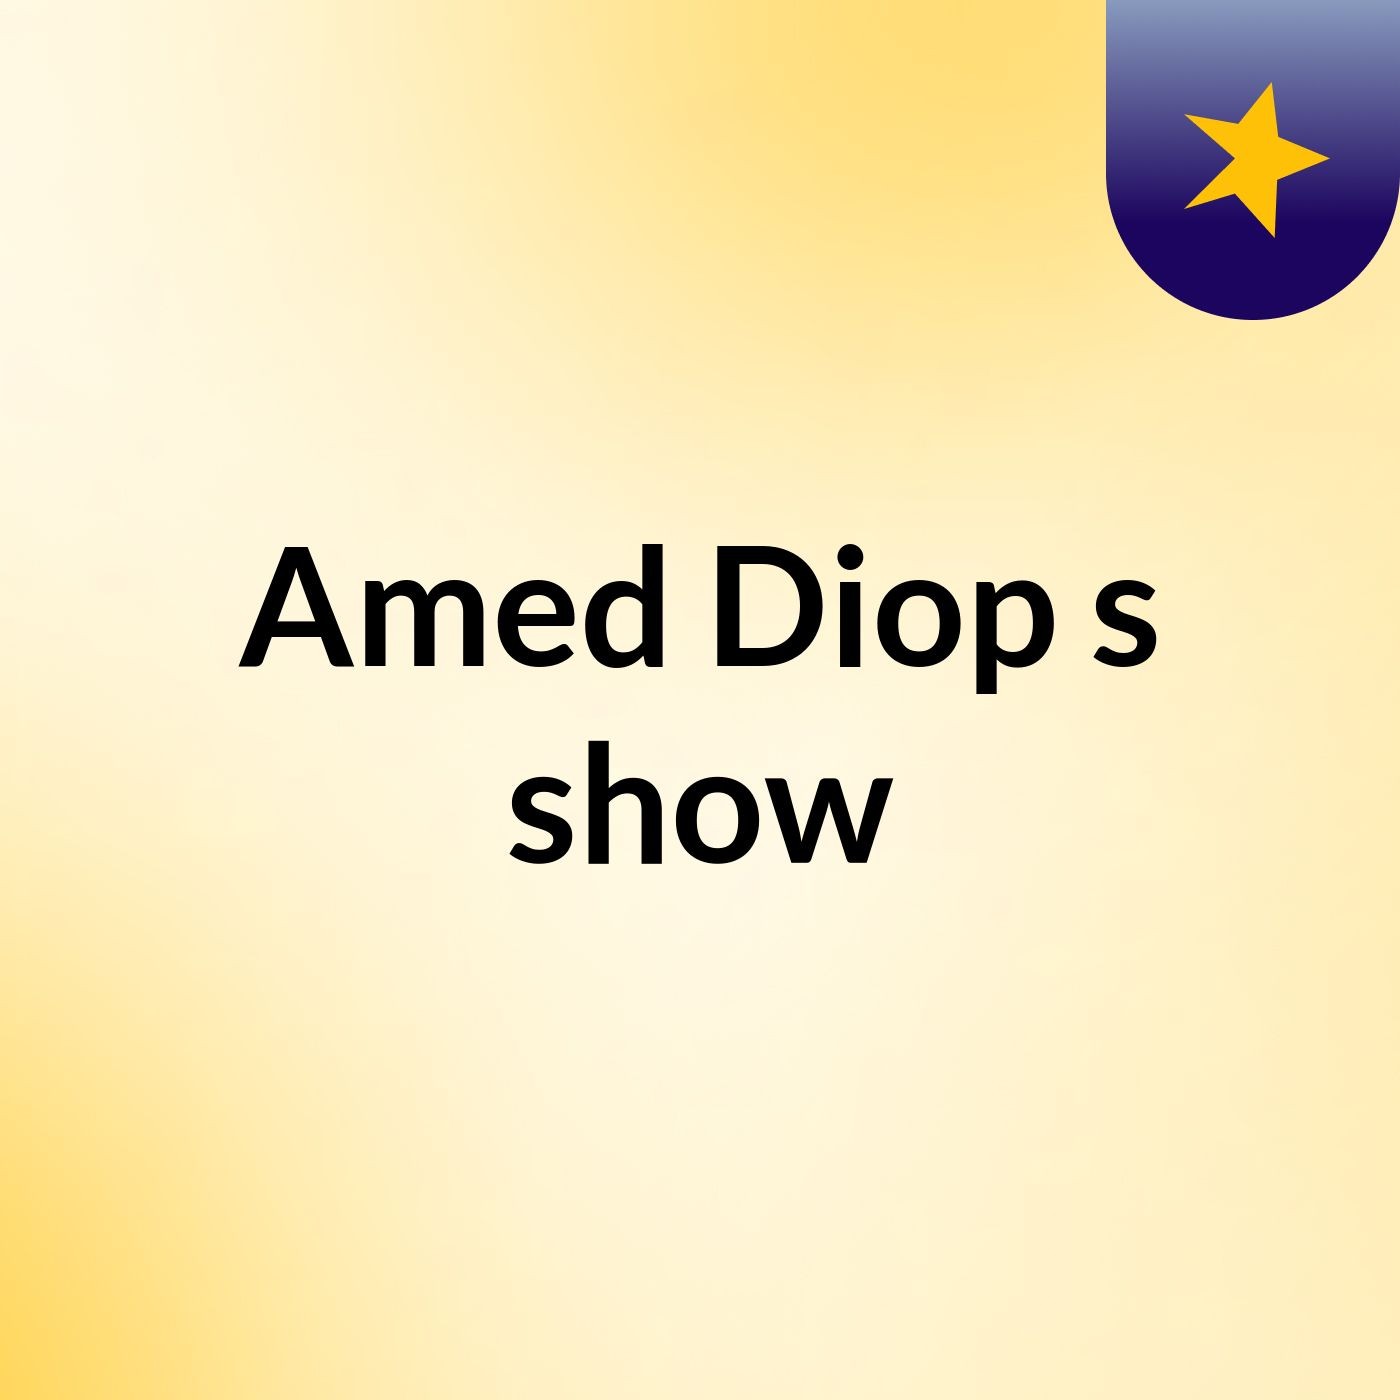 Amed Diop's show